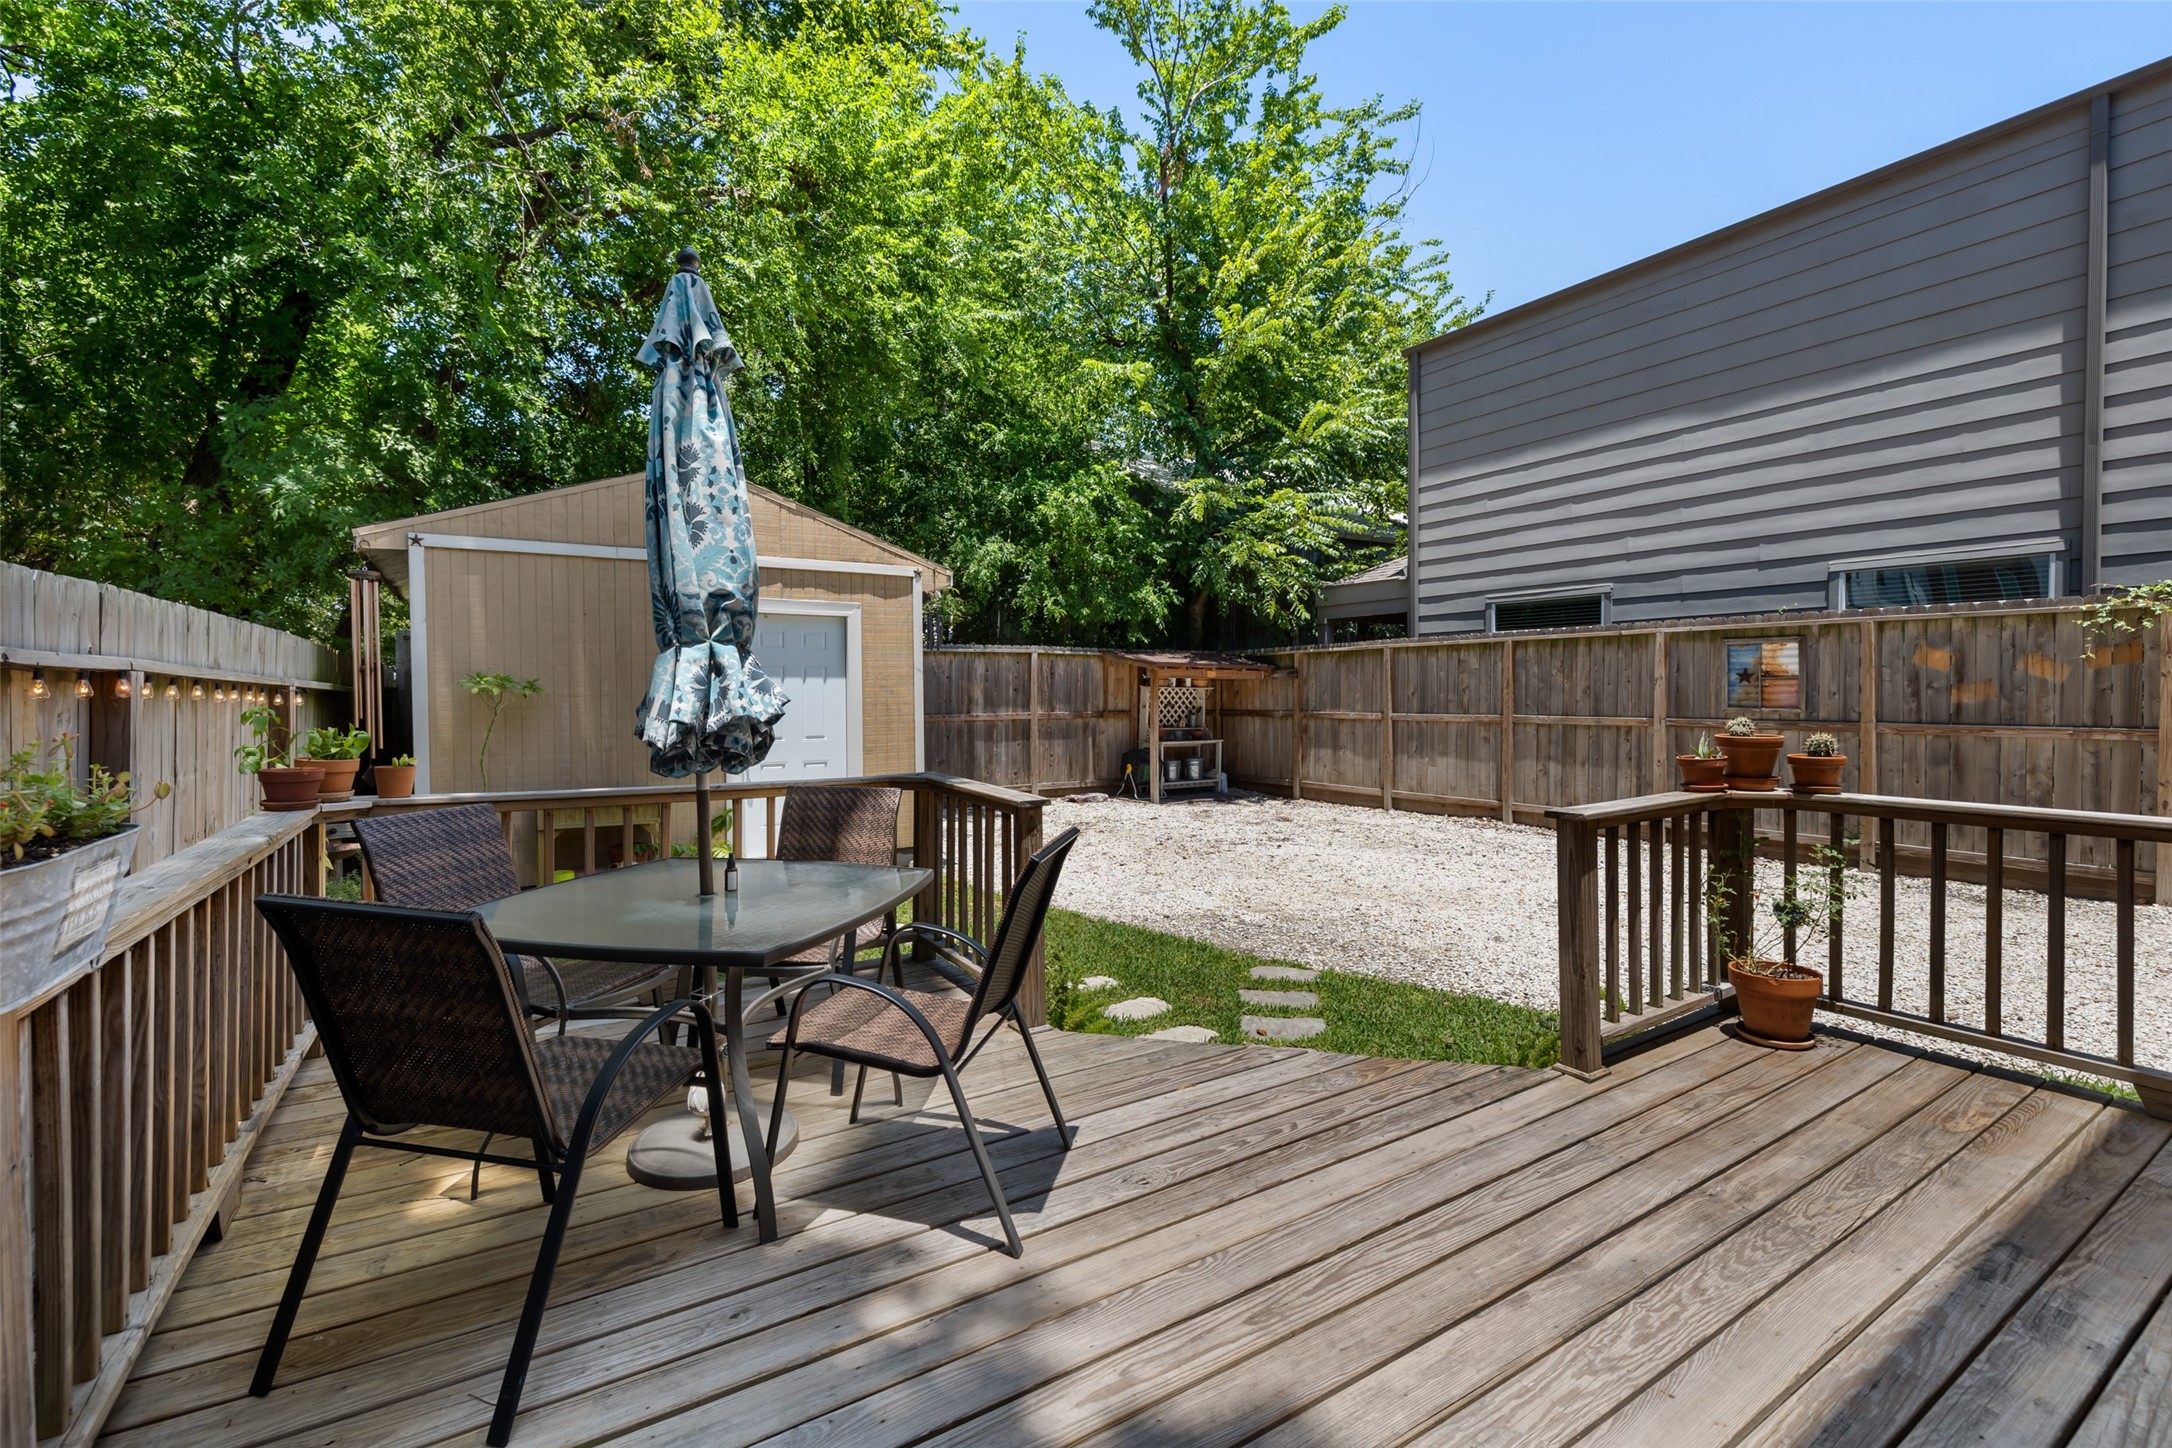 Just off the kitchen is the back patio featuring a wood deck !